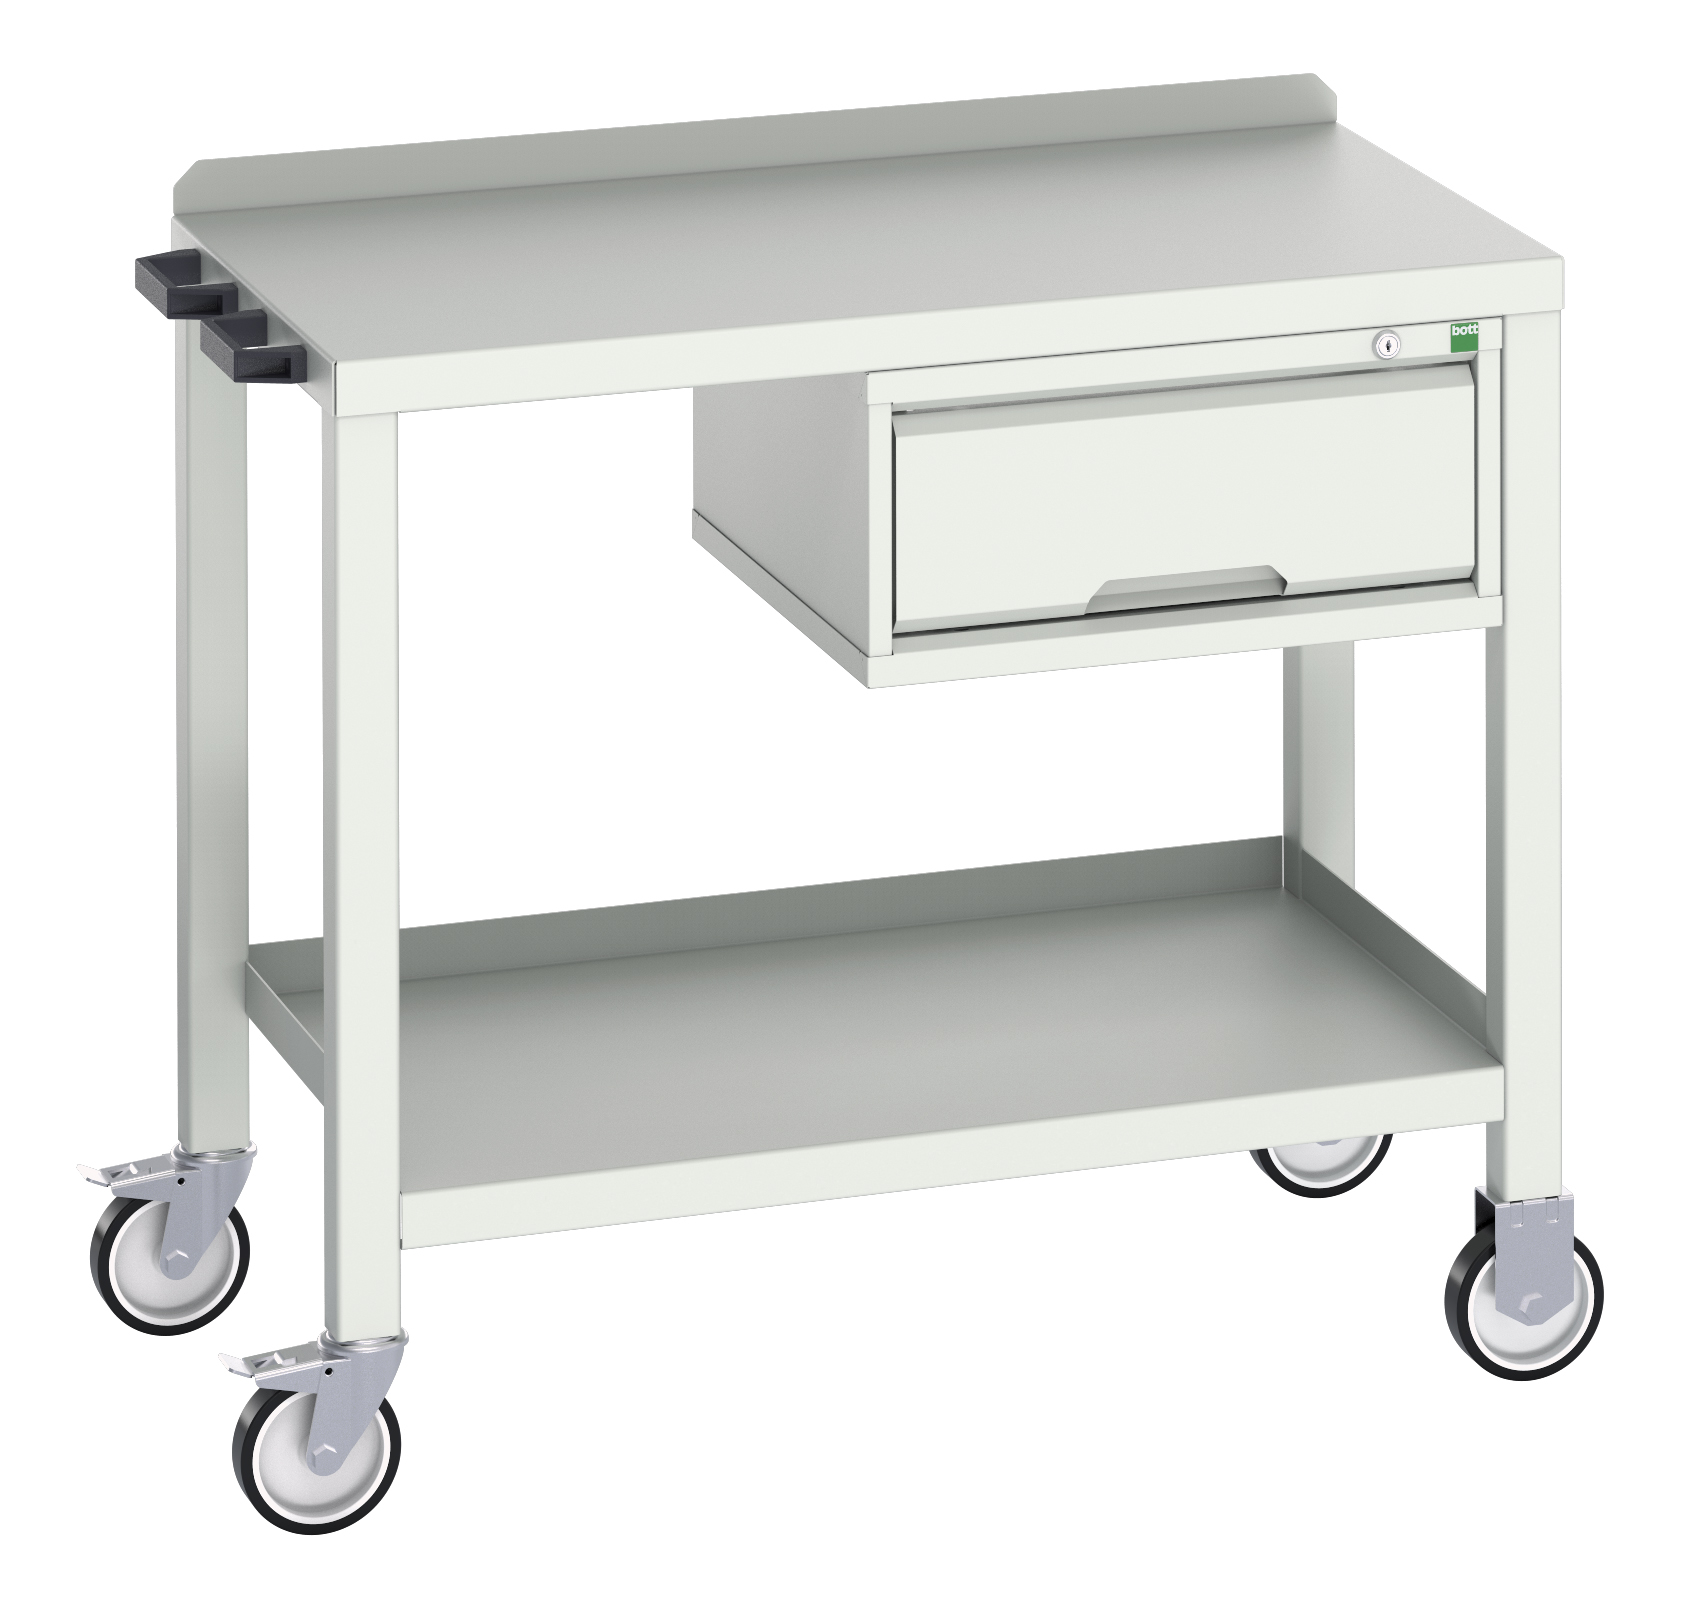 Bott Verso Mobile Welded Bench With 1 Drawer Cabinet - 16922800.16